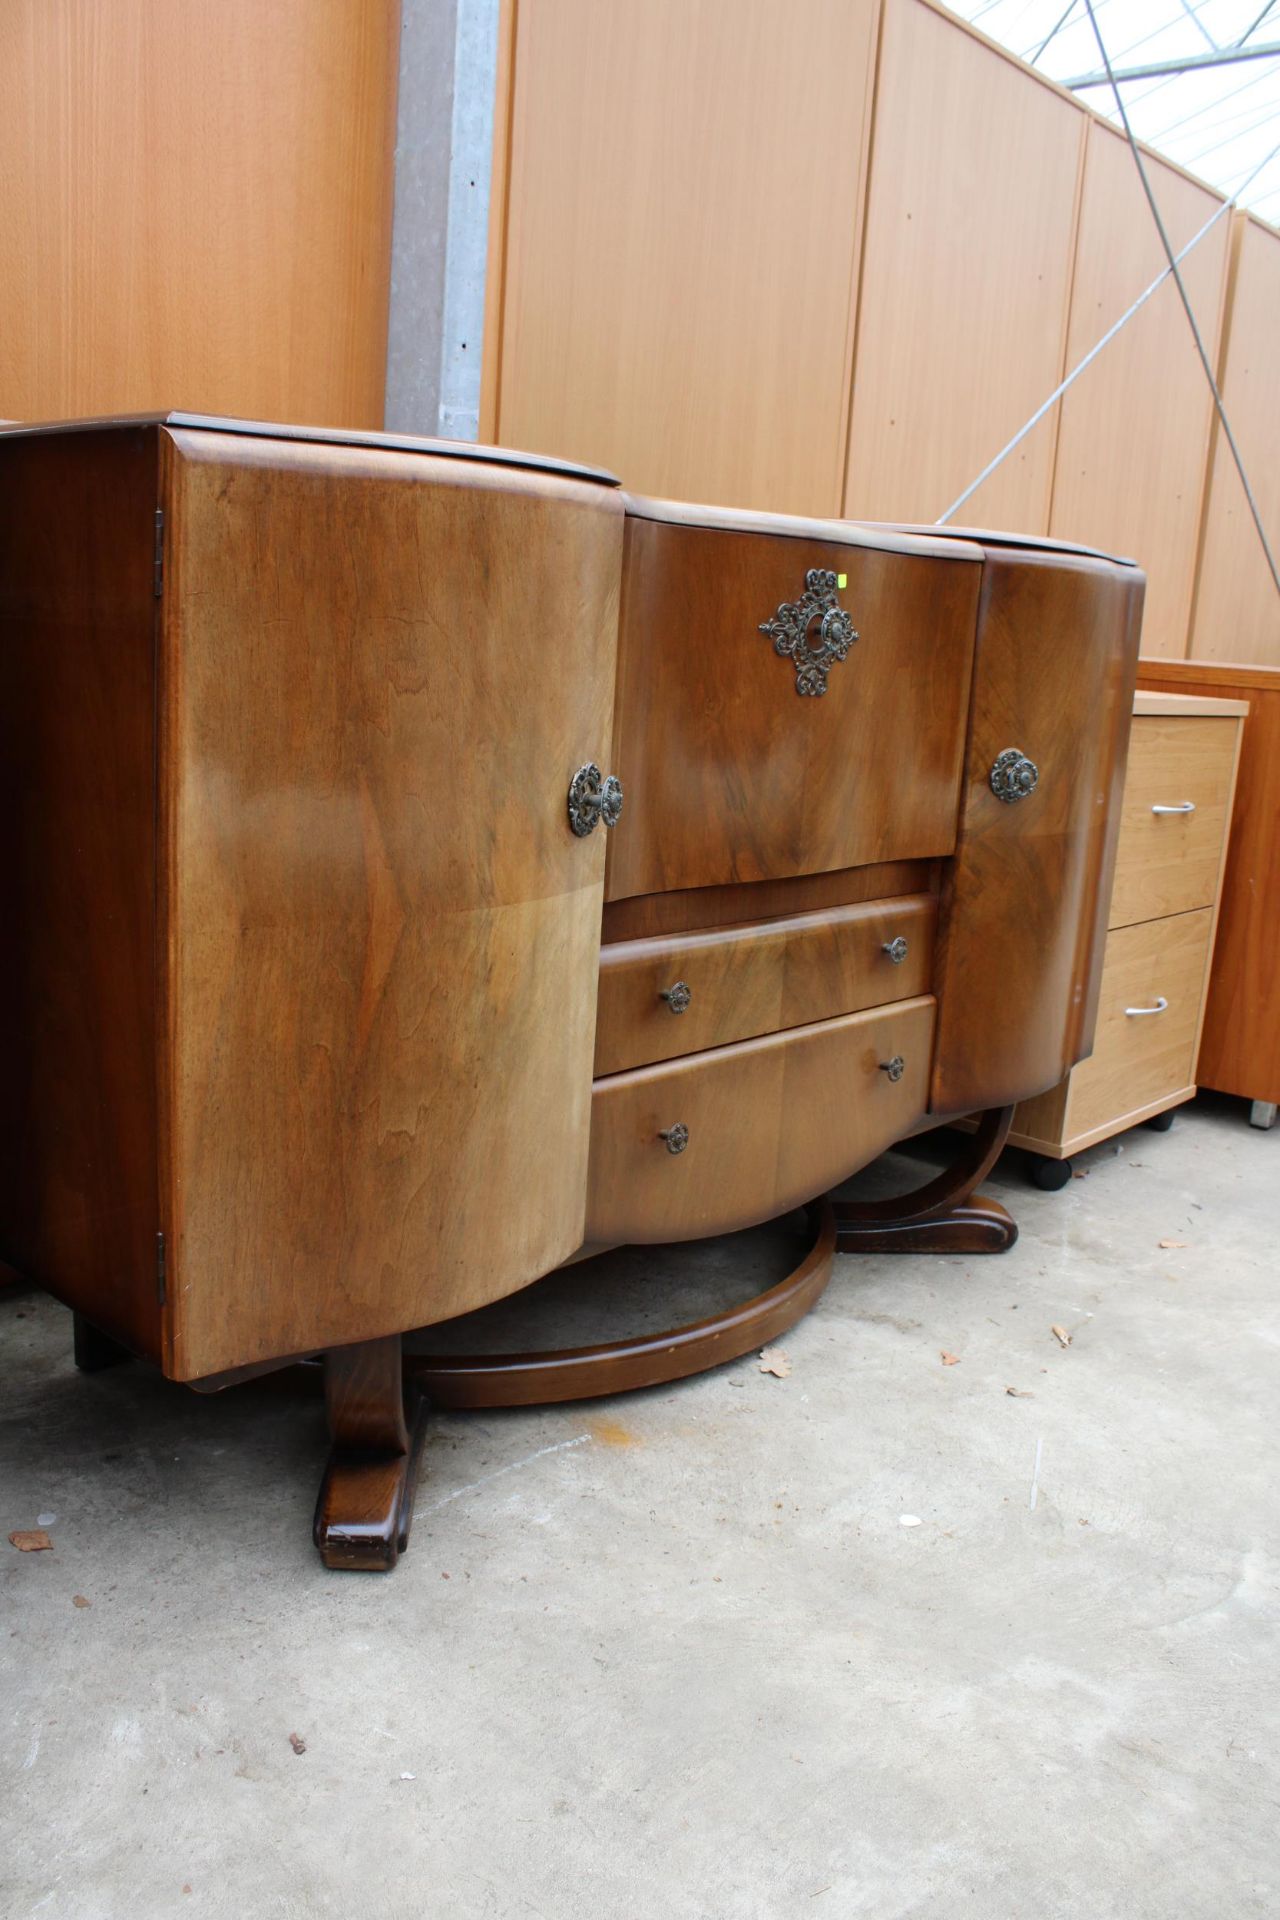 A MID 20TH CENTURY WALNUT BEAUTILITX SIDEBOARD/COCKTAIL CABINET 54" WIDE - Image 2 of 4